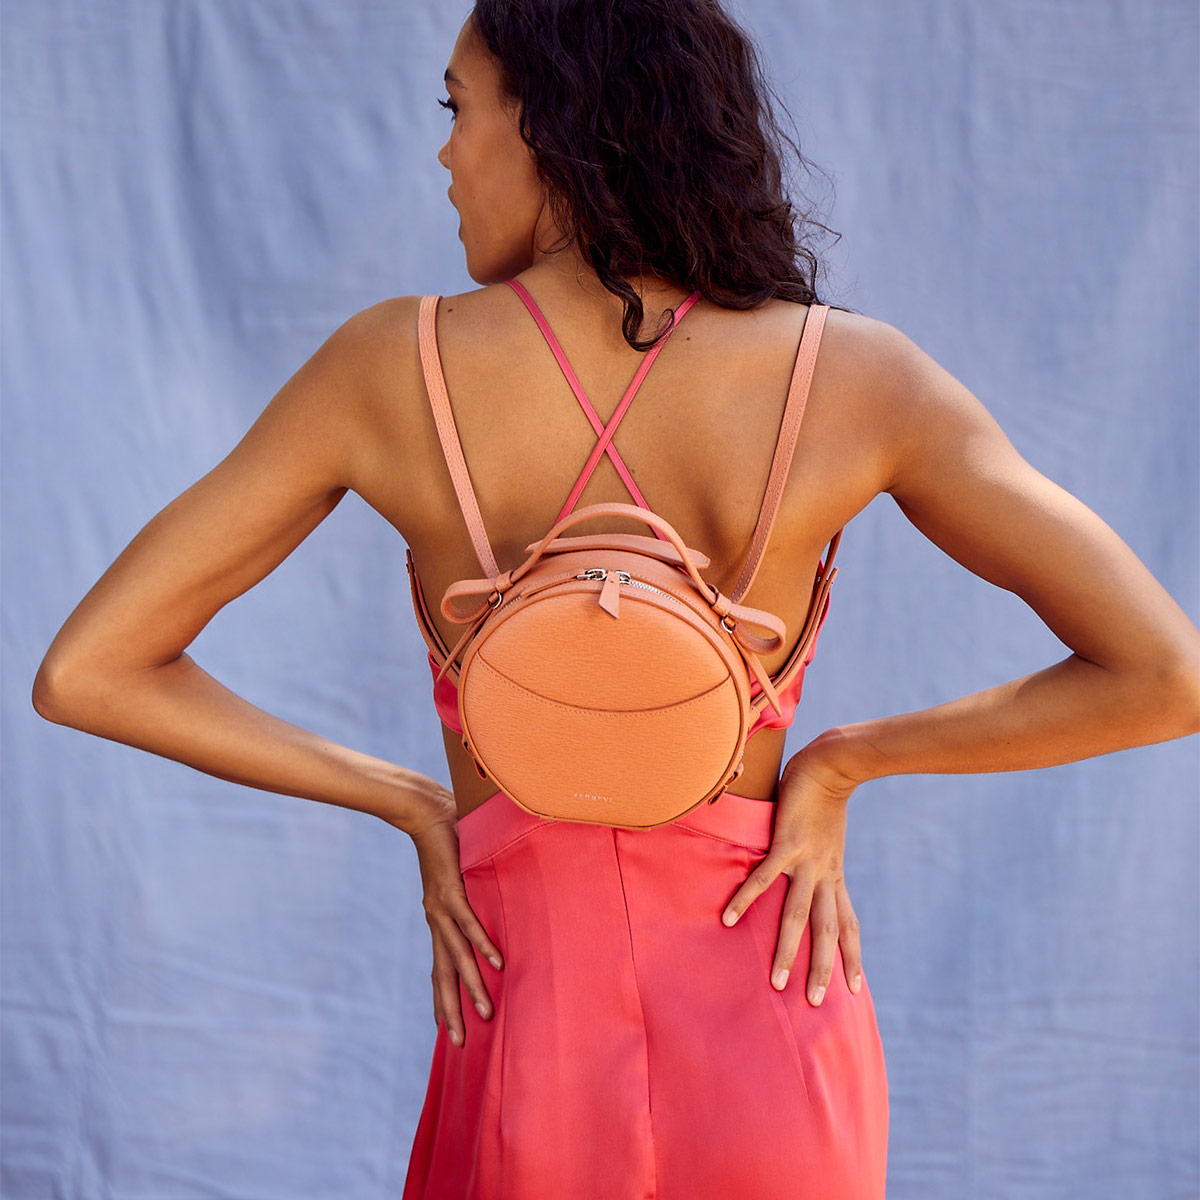 model against a blue background wearing a pink dress and wearing a pink circle bag as a backpack